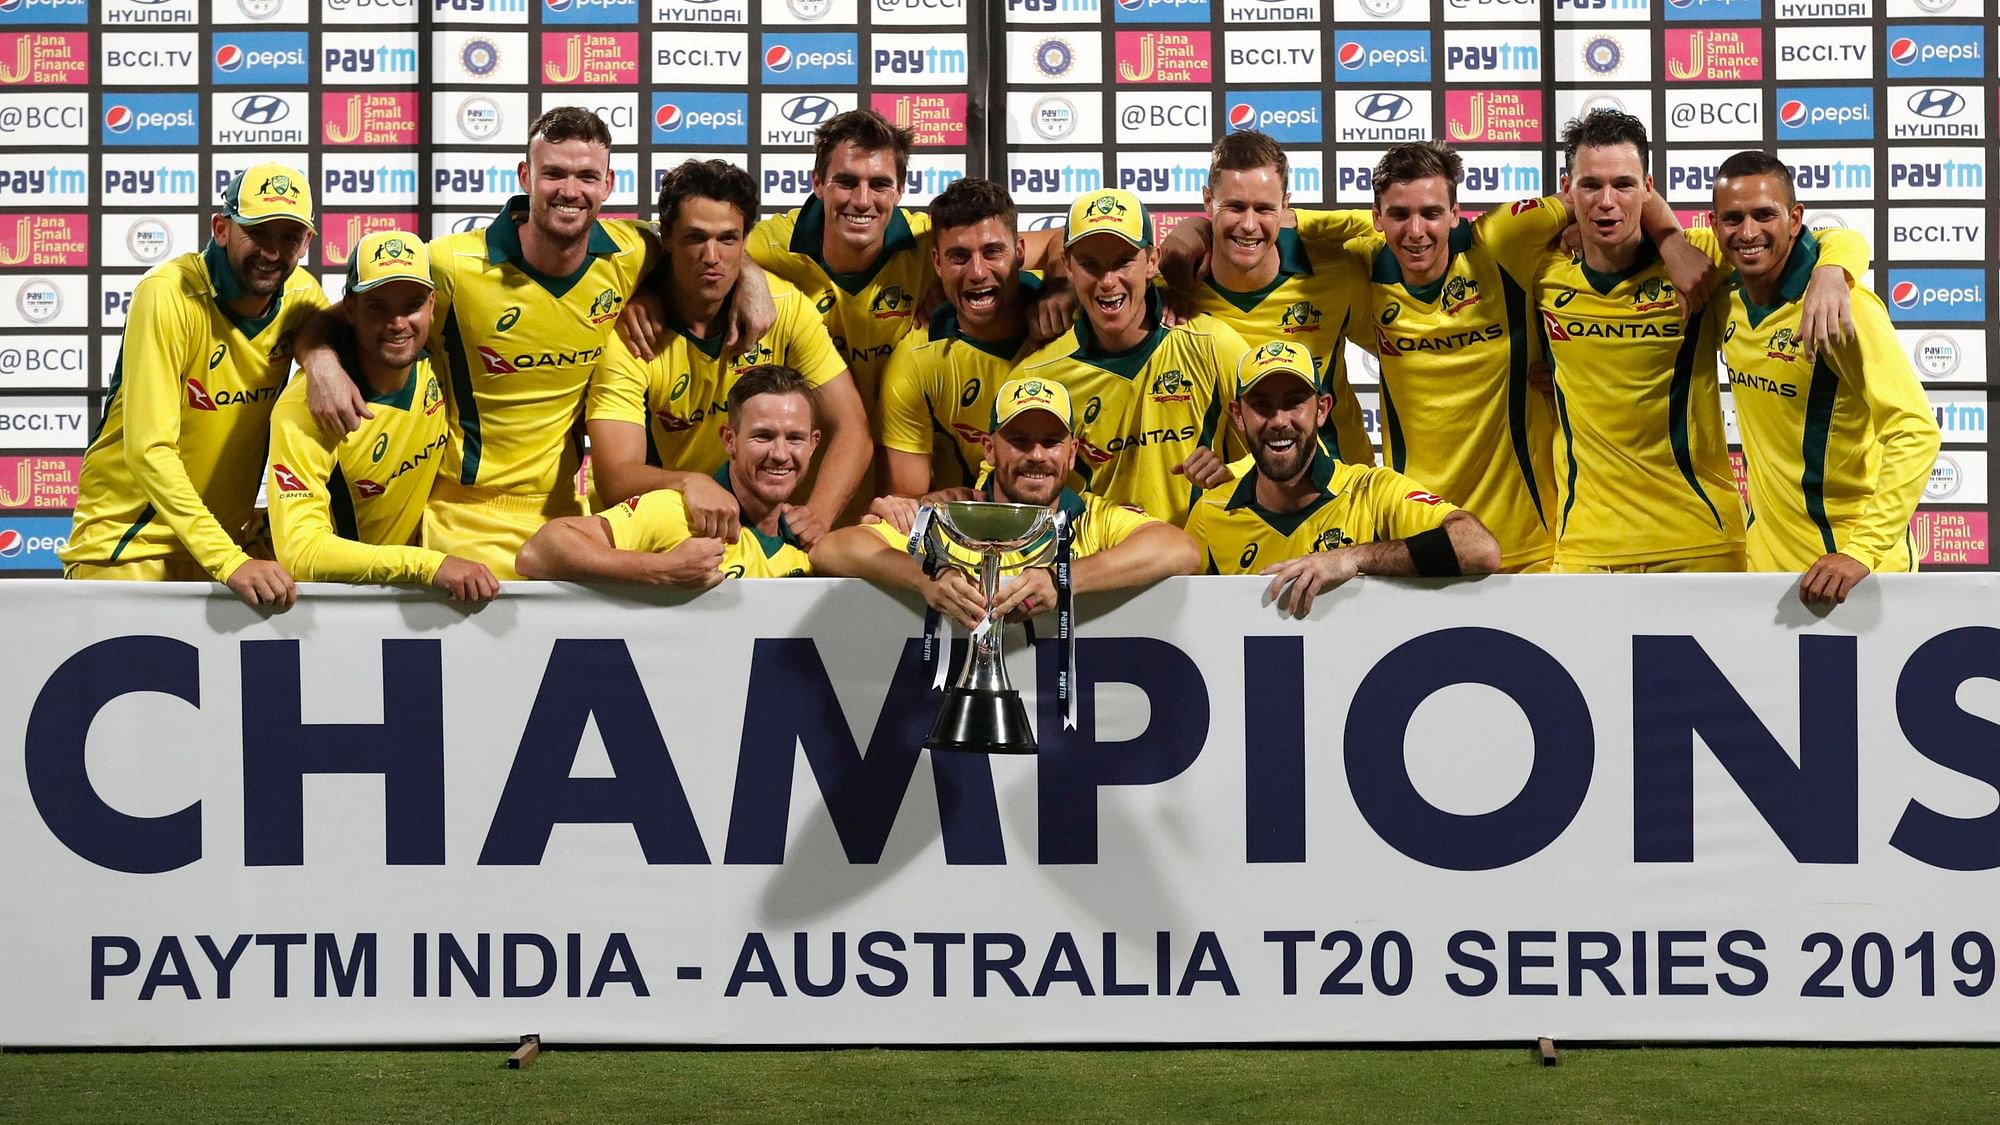 Members of Australian team pose with the winners trophy after their win in the second T20 international cricket match against India in Bangalore, India, Wednesday, Feb. 27, 2019.&nbsp;